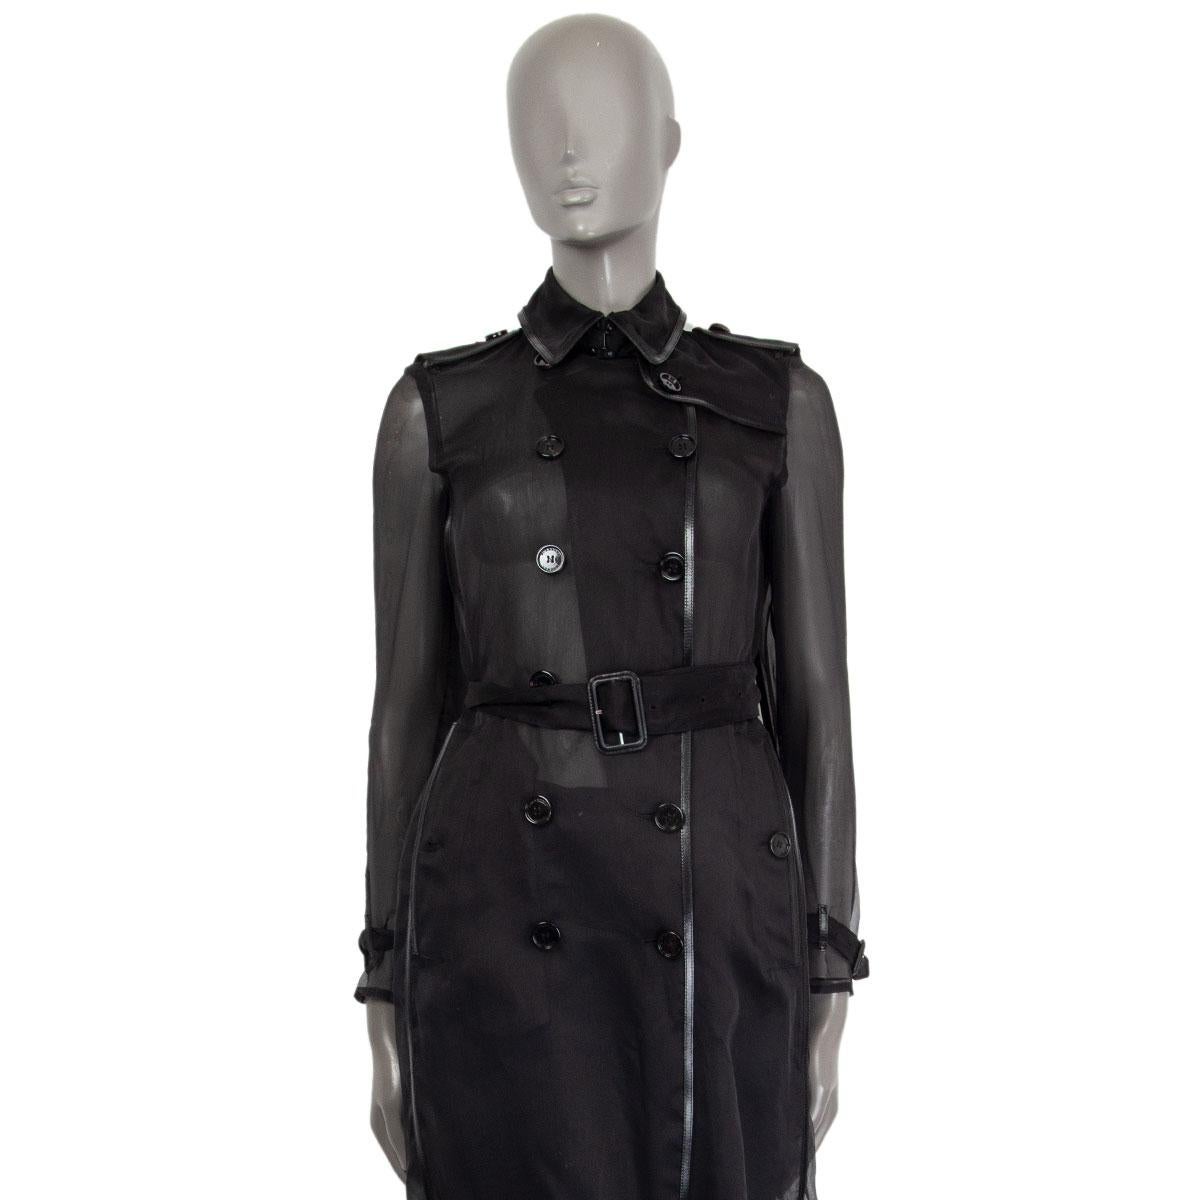 Burberry organza trench coat in silk (100%) with a flat collar, apaulettes, buttoned slit pockets and belted cuffs. Has calf leather trimming details. Closes on the front with buttons. Unlined and sheer. Has been worn and is in excellent